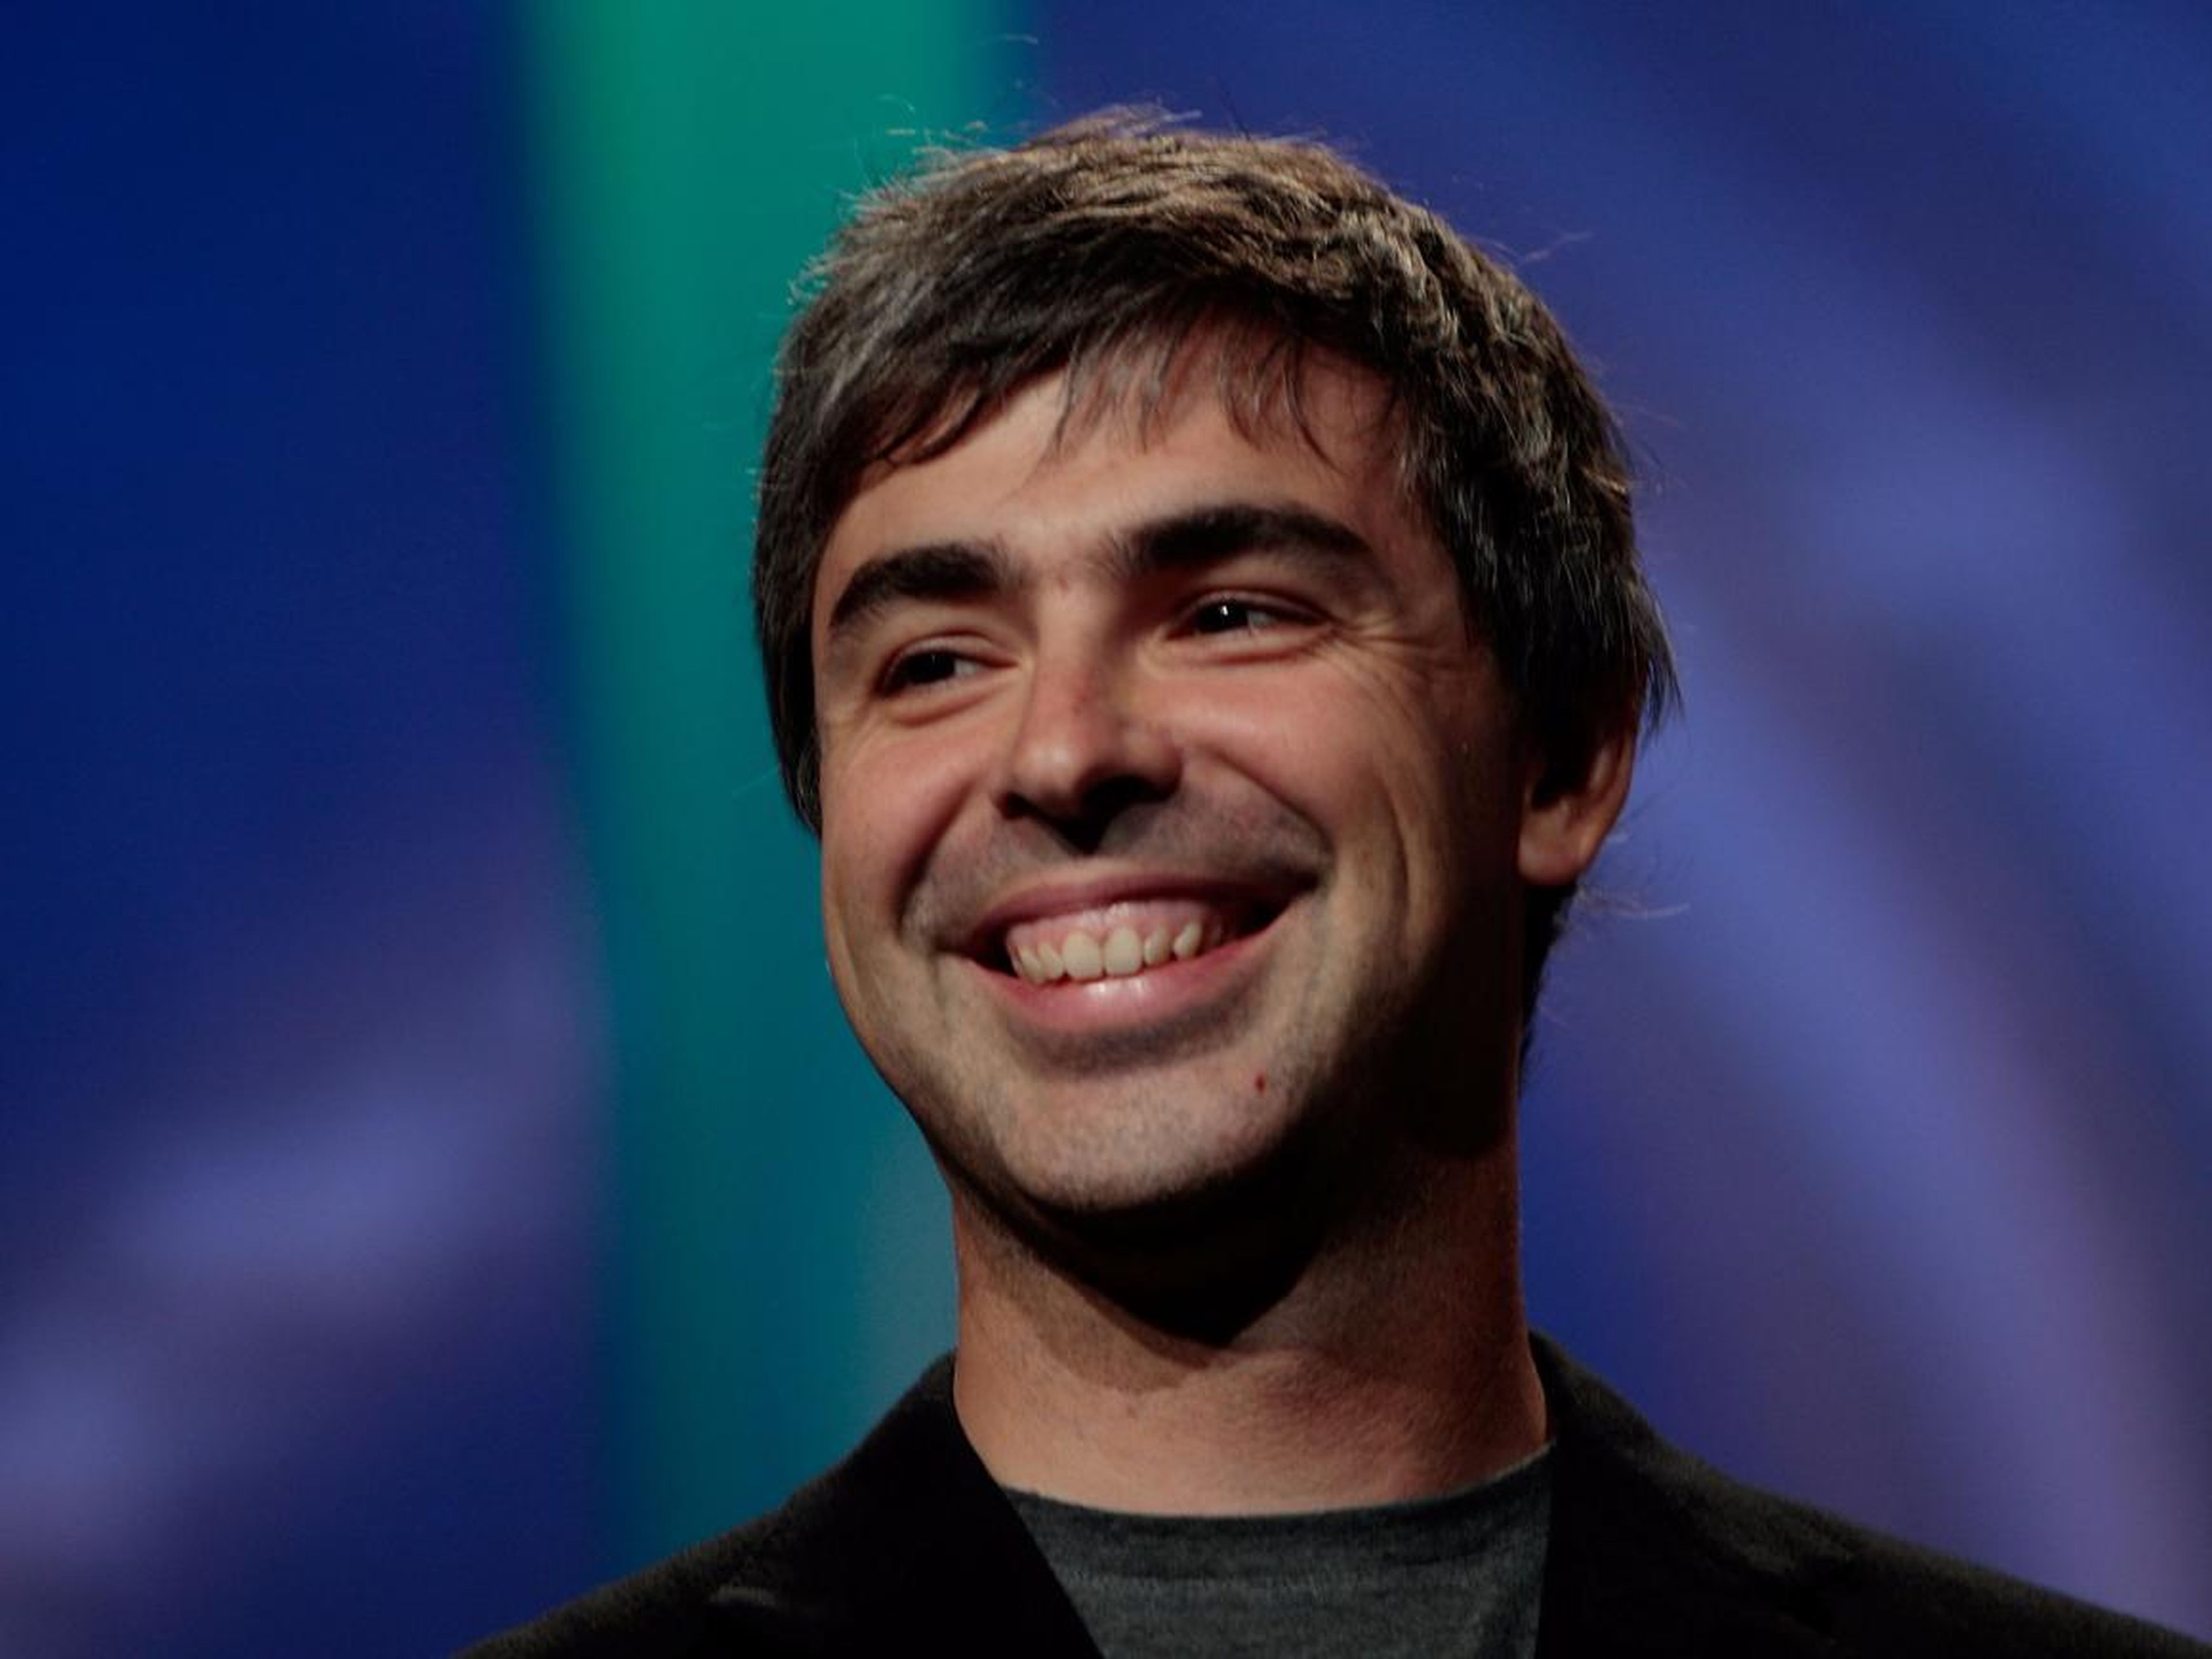 6. Larry Page, cofounder of Google. Net worth: £35.2 billion ($47.8 billion). Page was Google's first CEO until 2001.